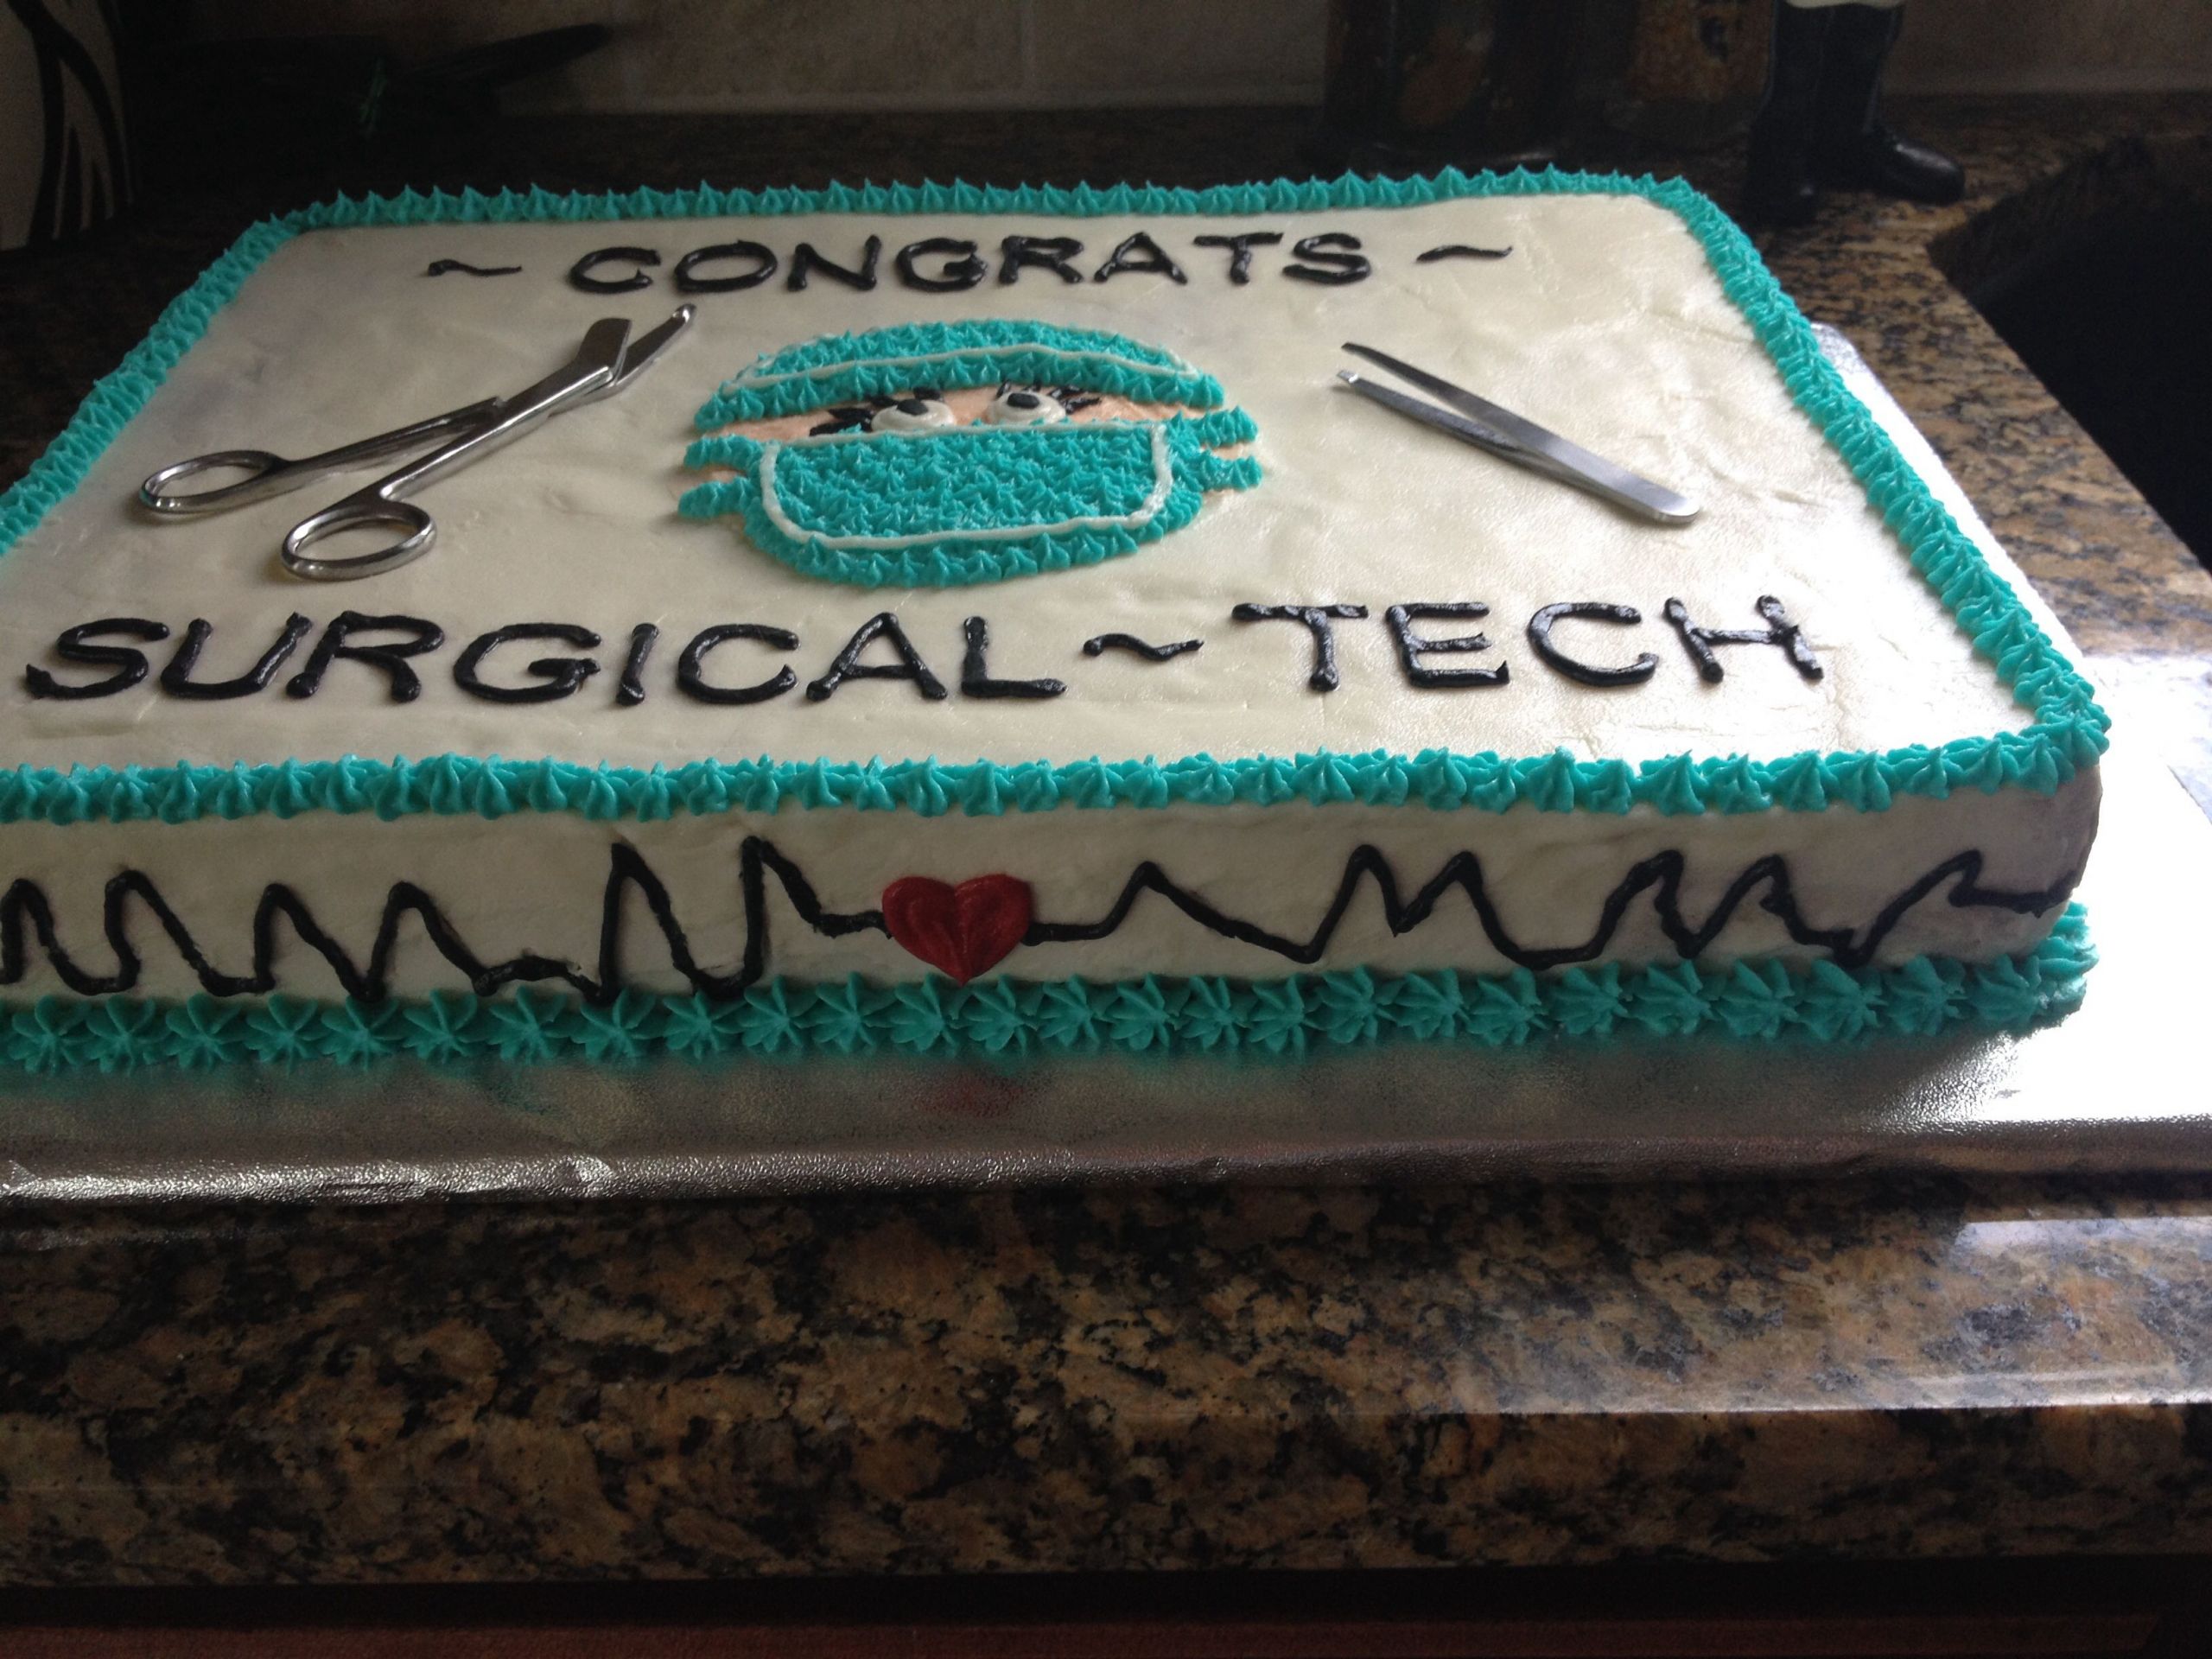 Surgical Tech Graduation Party Ideas
 Surgical Tech Cake My cake creations